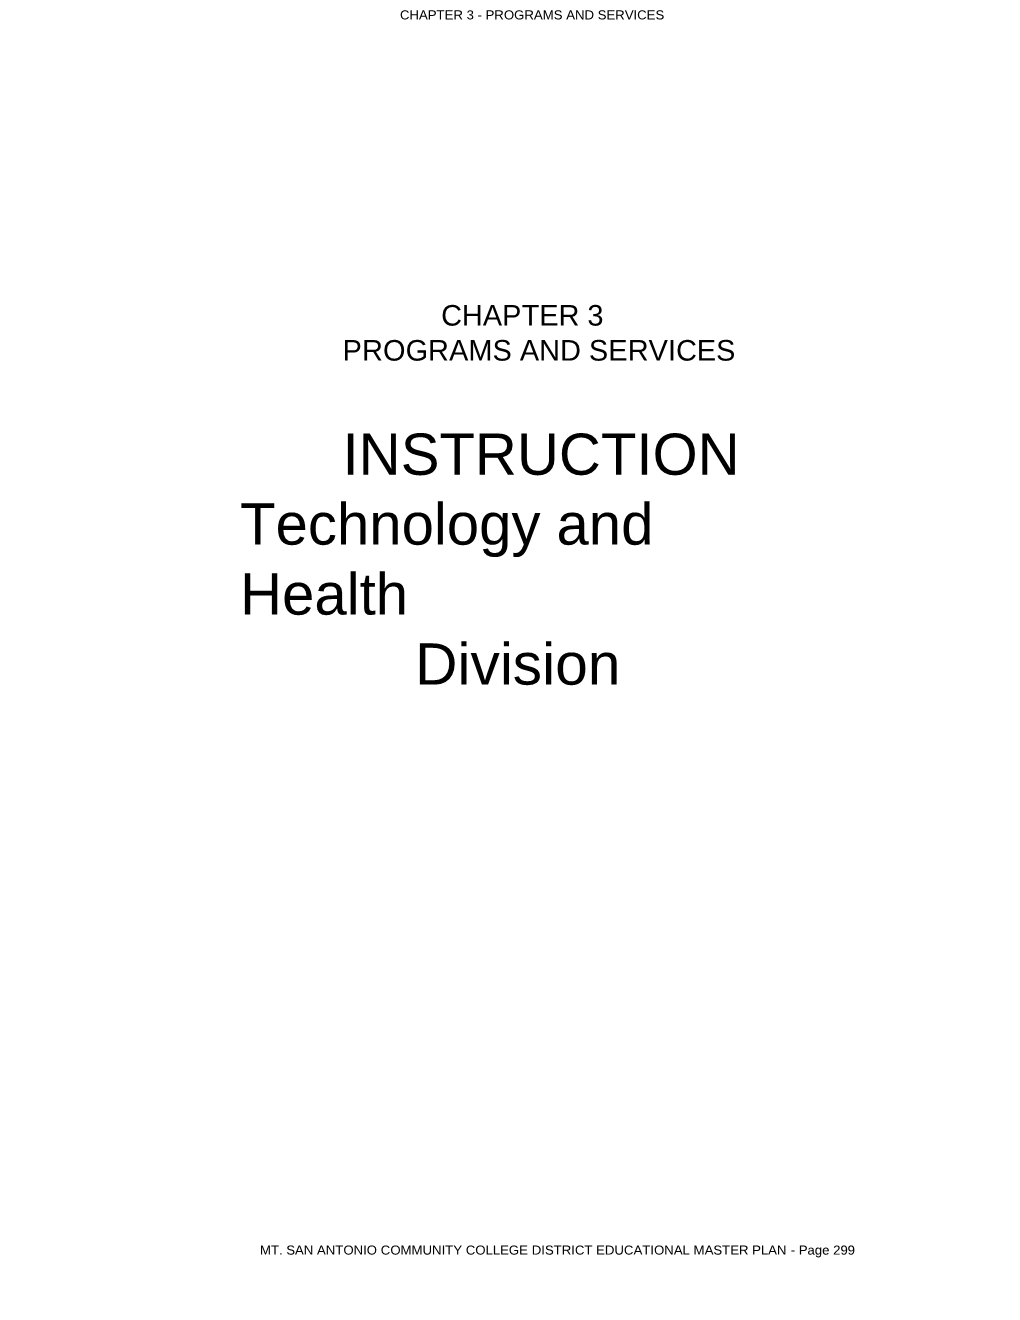 Chapter 3 - Programs and Services